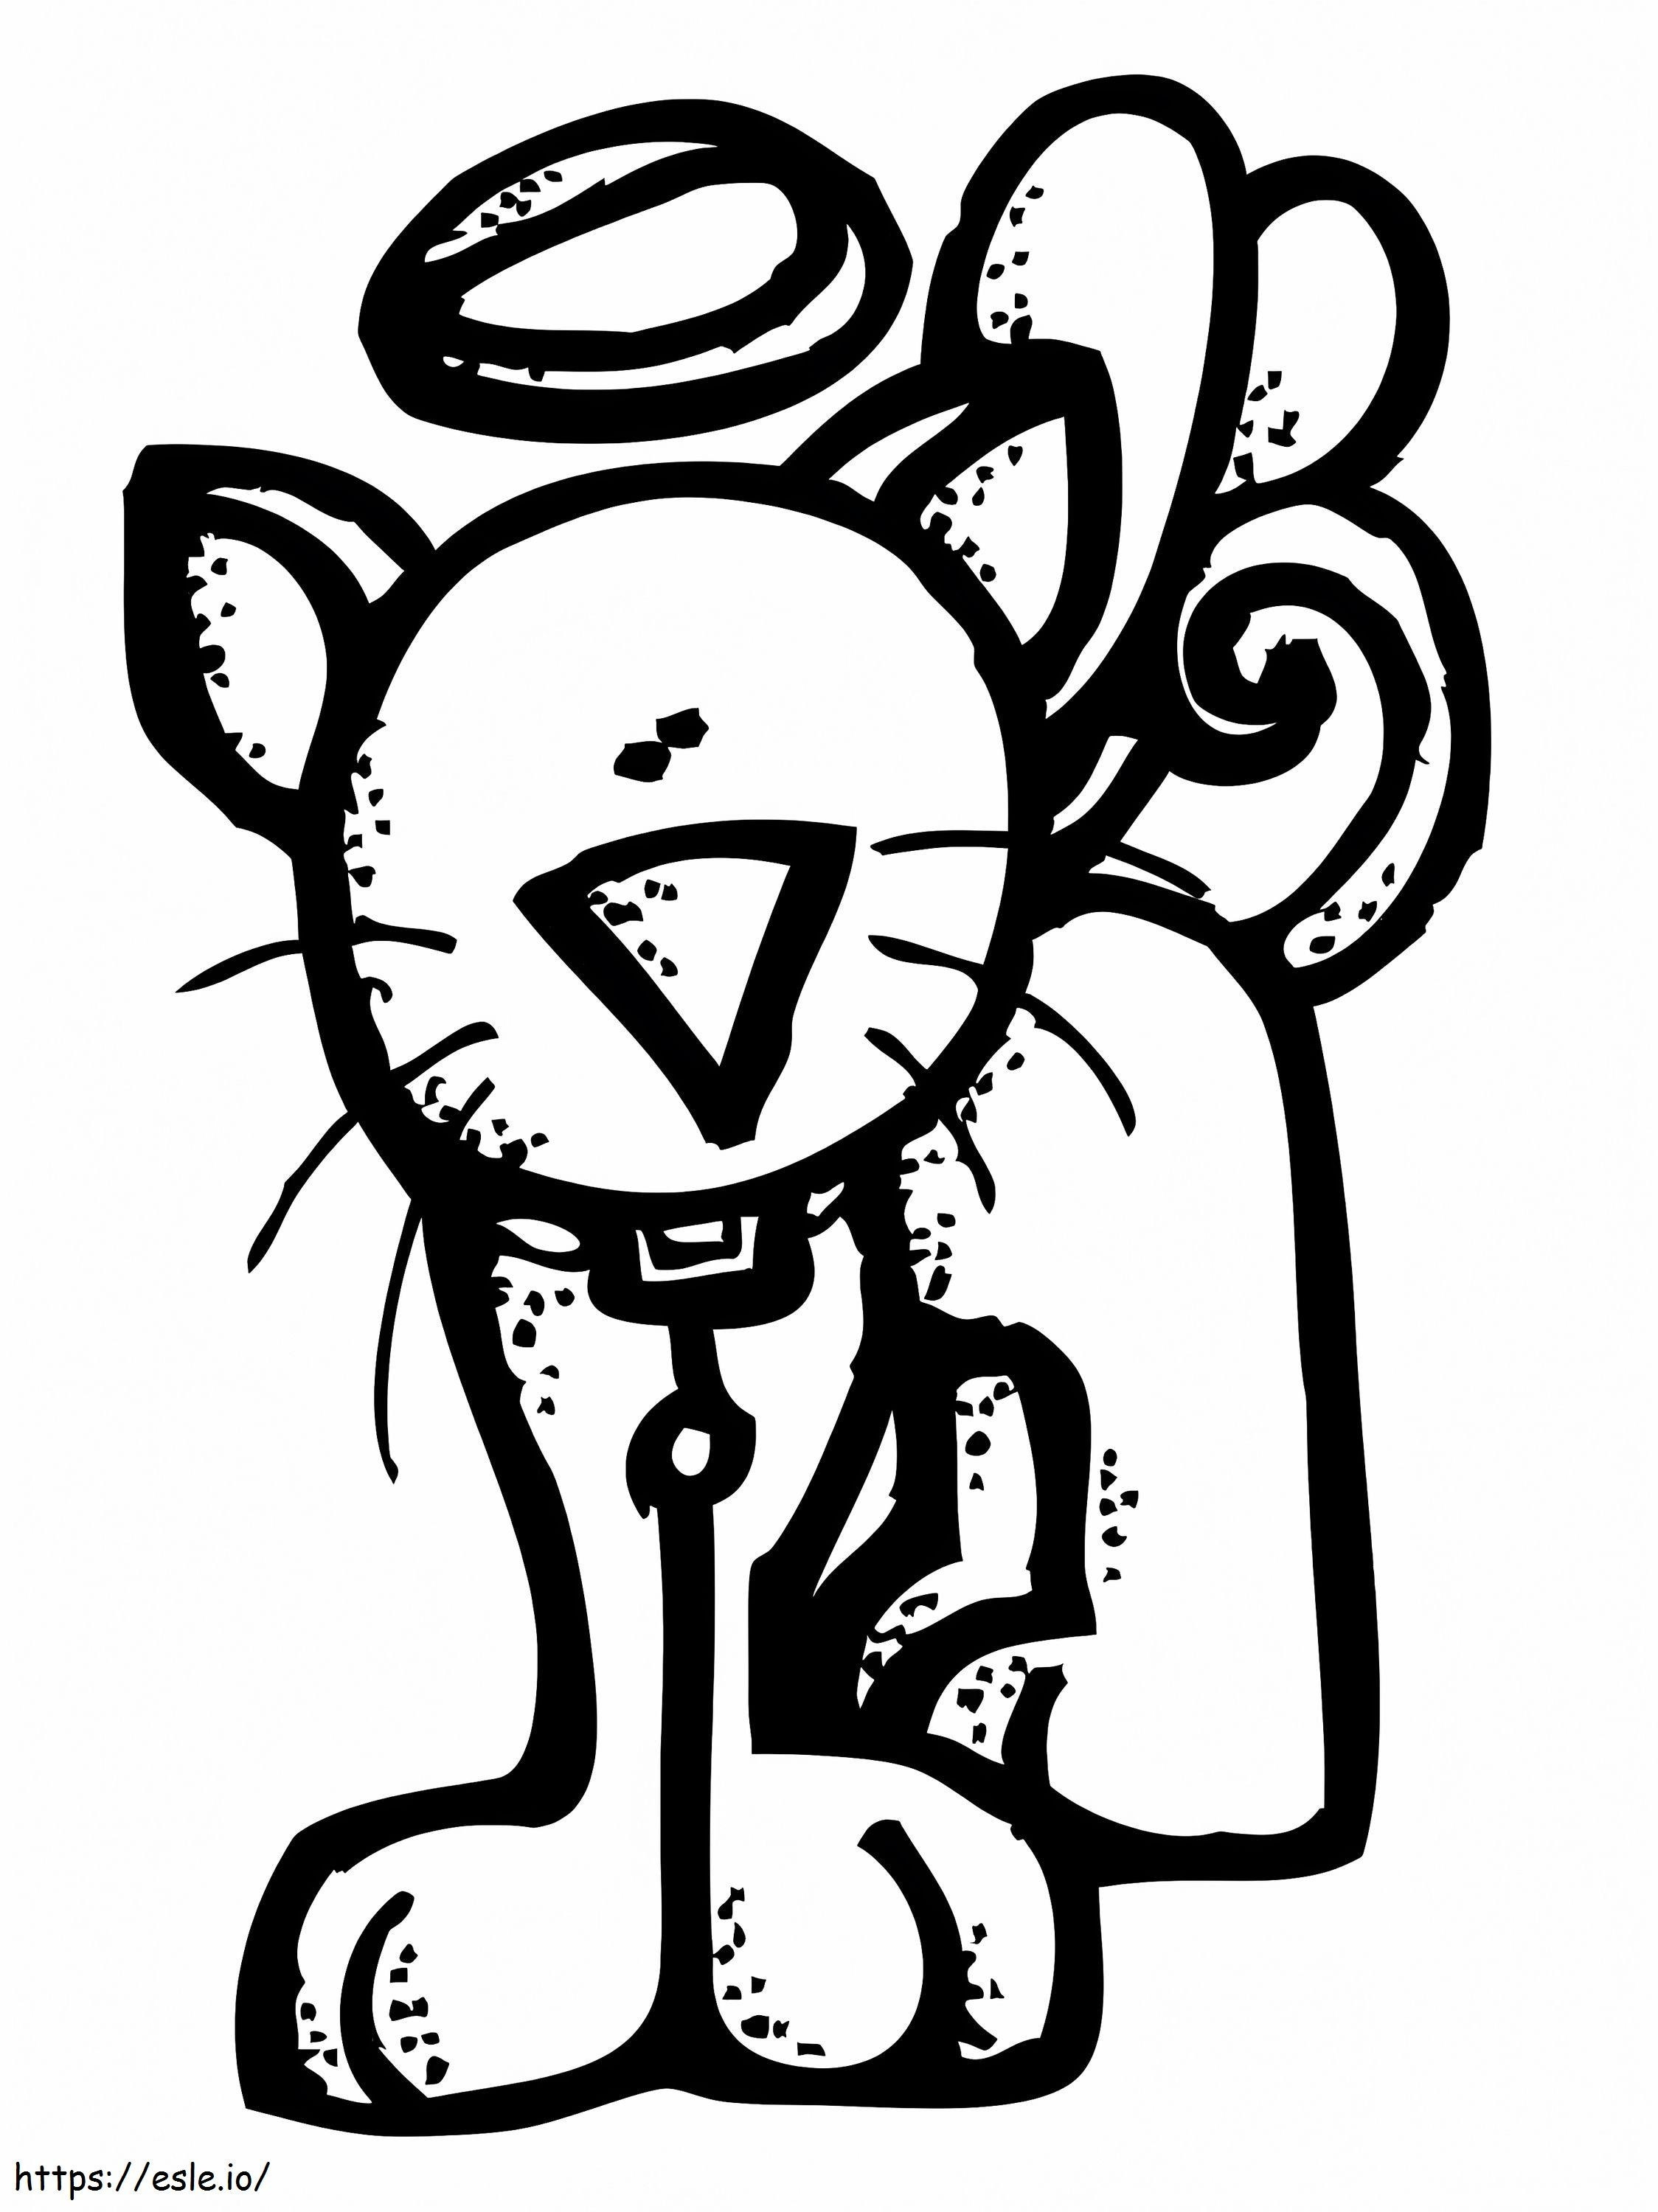 Kitty Melonheadz coloring page